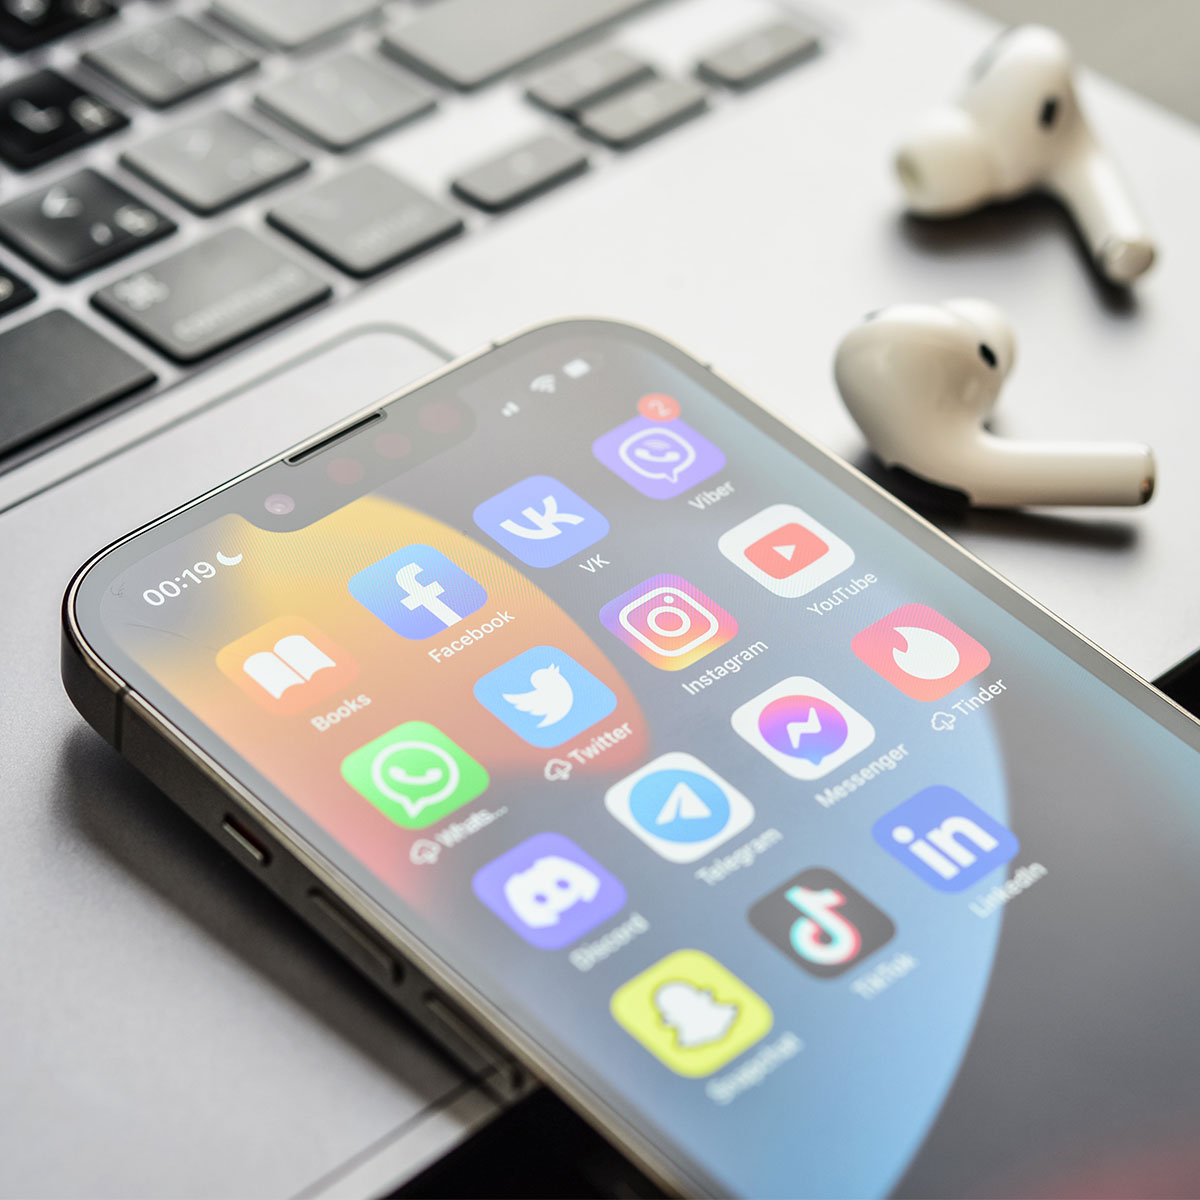 The Best Productivity Apps for 2023